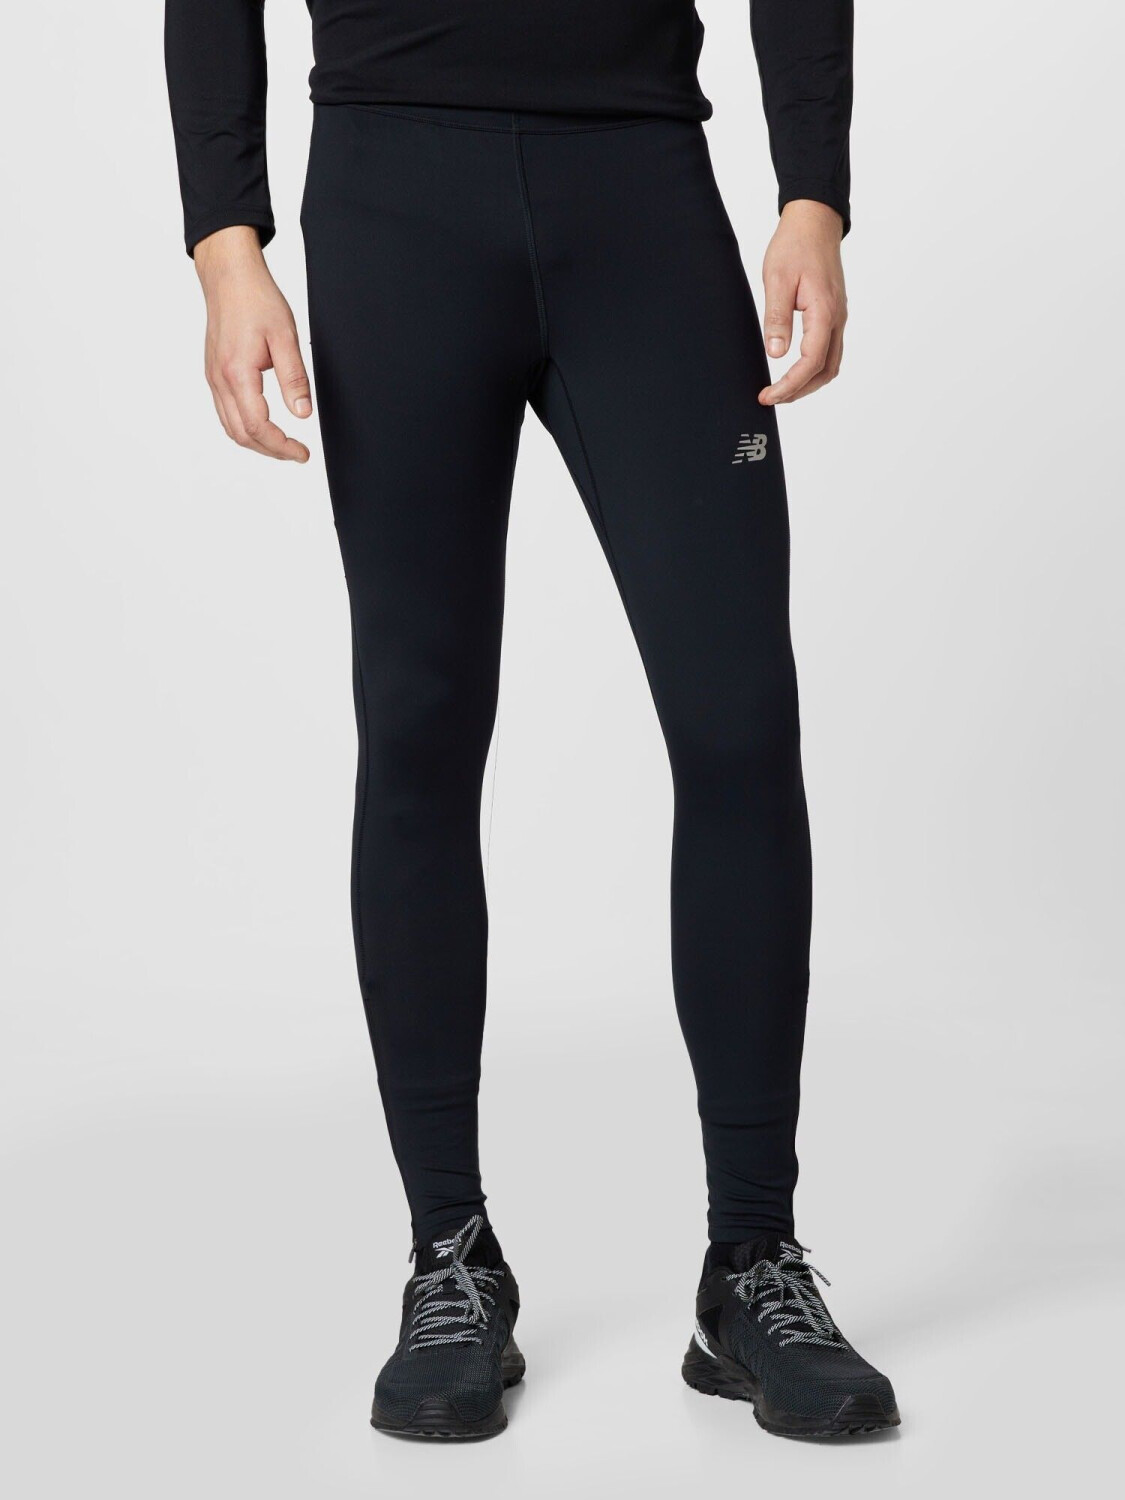 New Balance Accelerate Tights (For Men) 